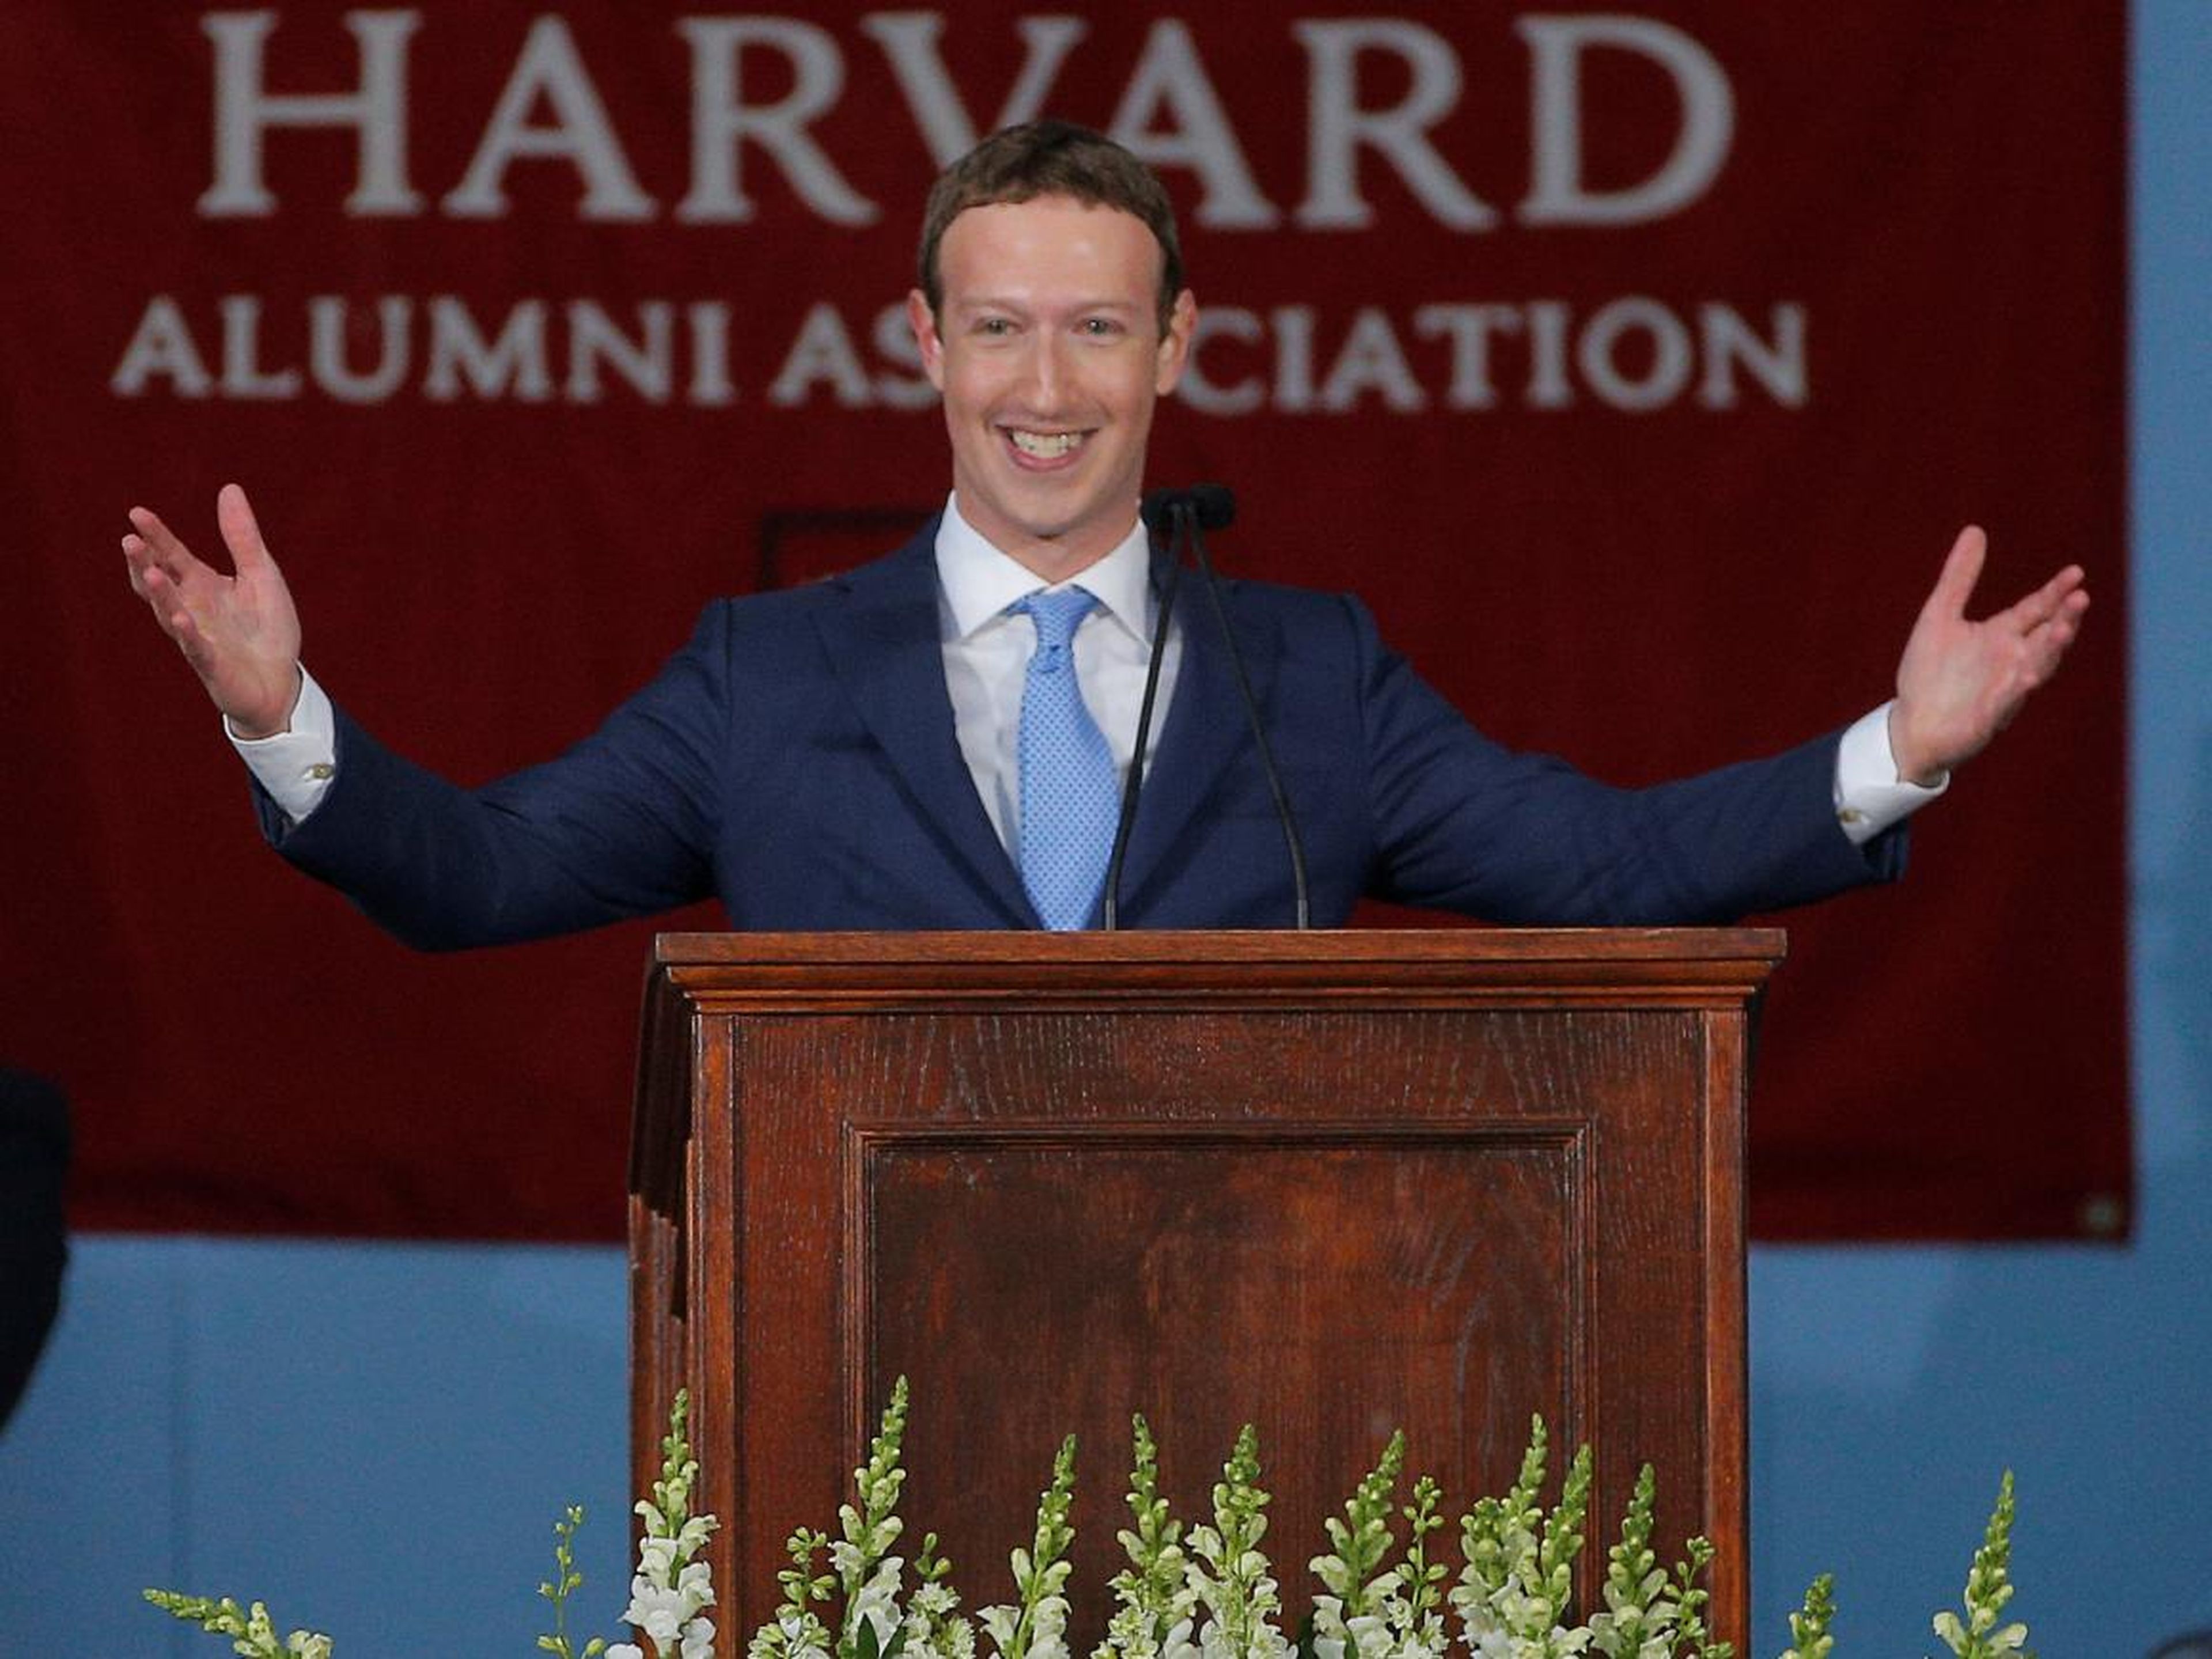 As Facebook hits its 15th birthday, the company faces an uncertain future. There's no question Mark Zuckerberg has come a long way since he launched the site out of his Harvard dorm room in 2004.